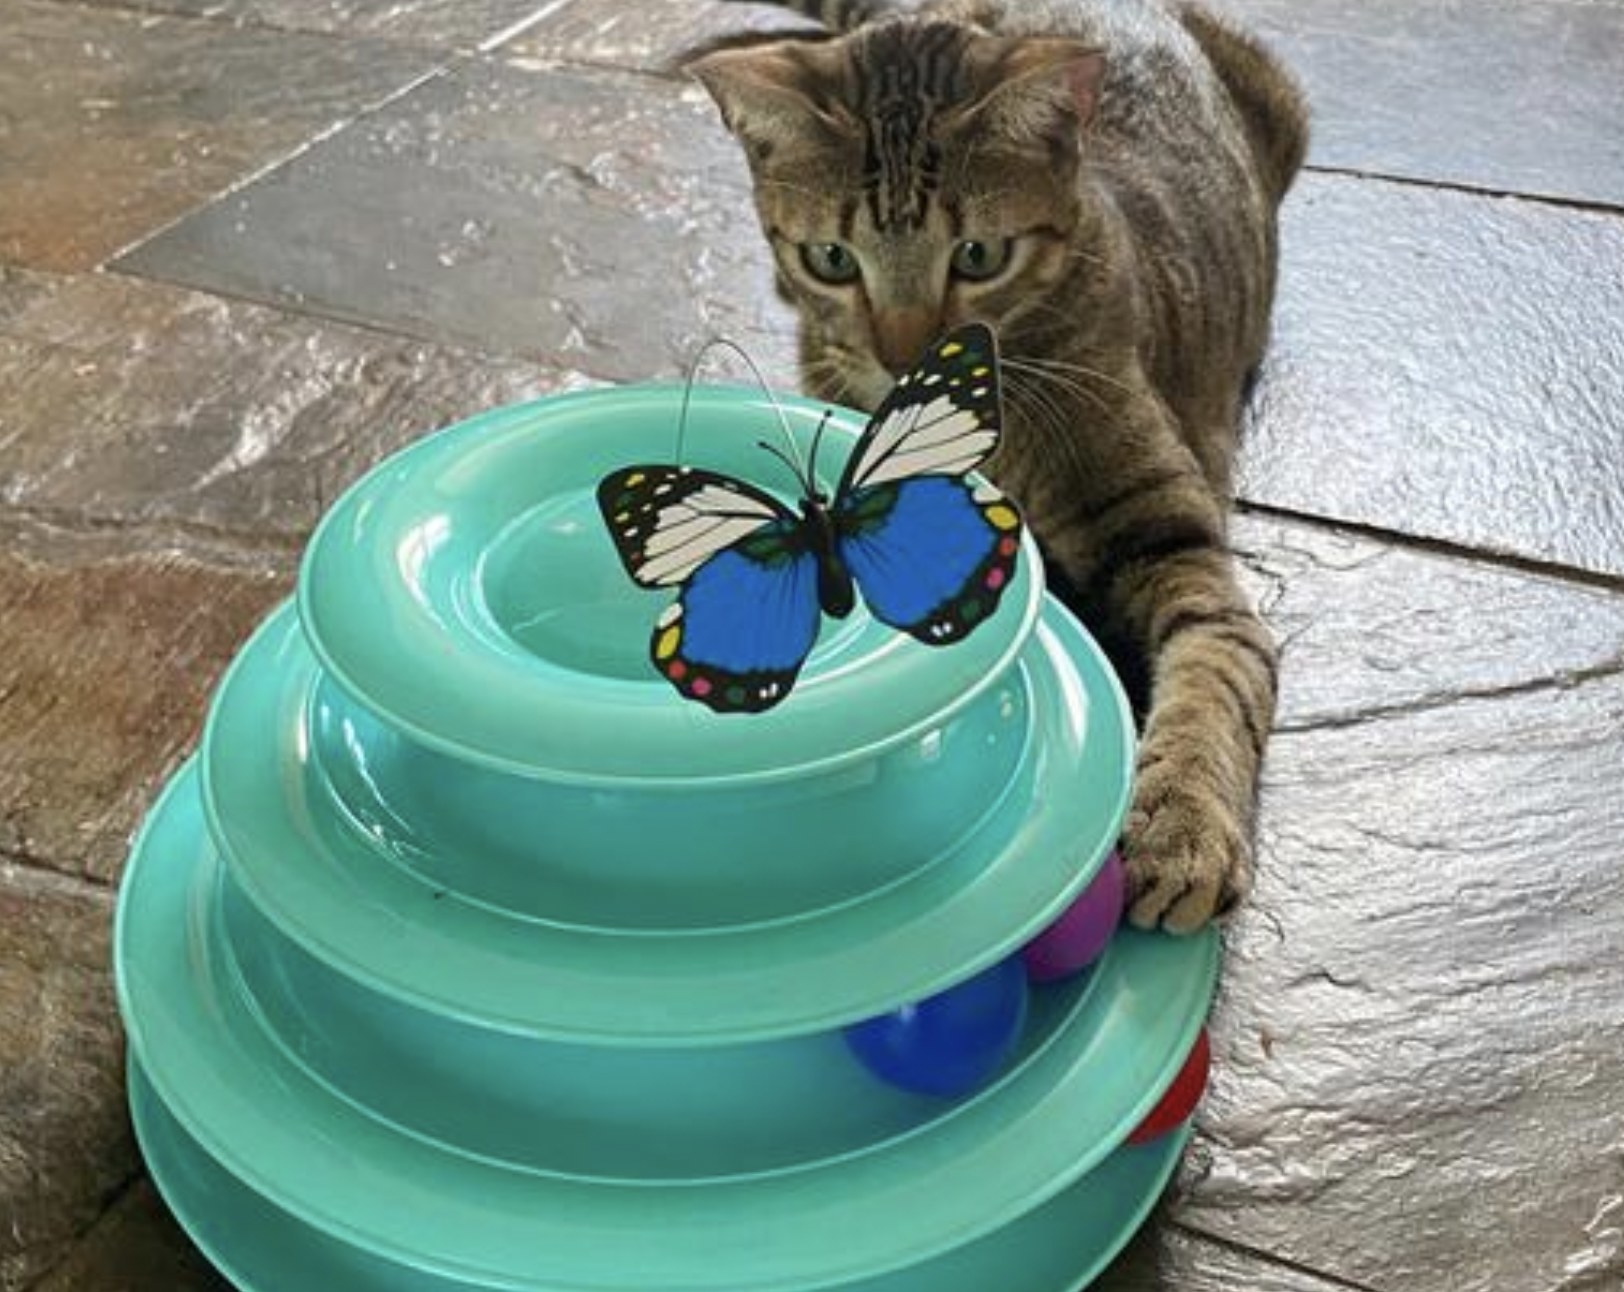 A cat playing with a triple-tiered blue cat toy